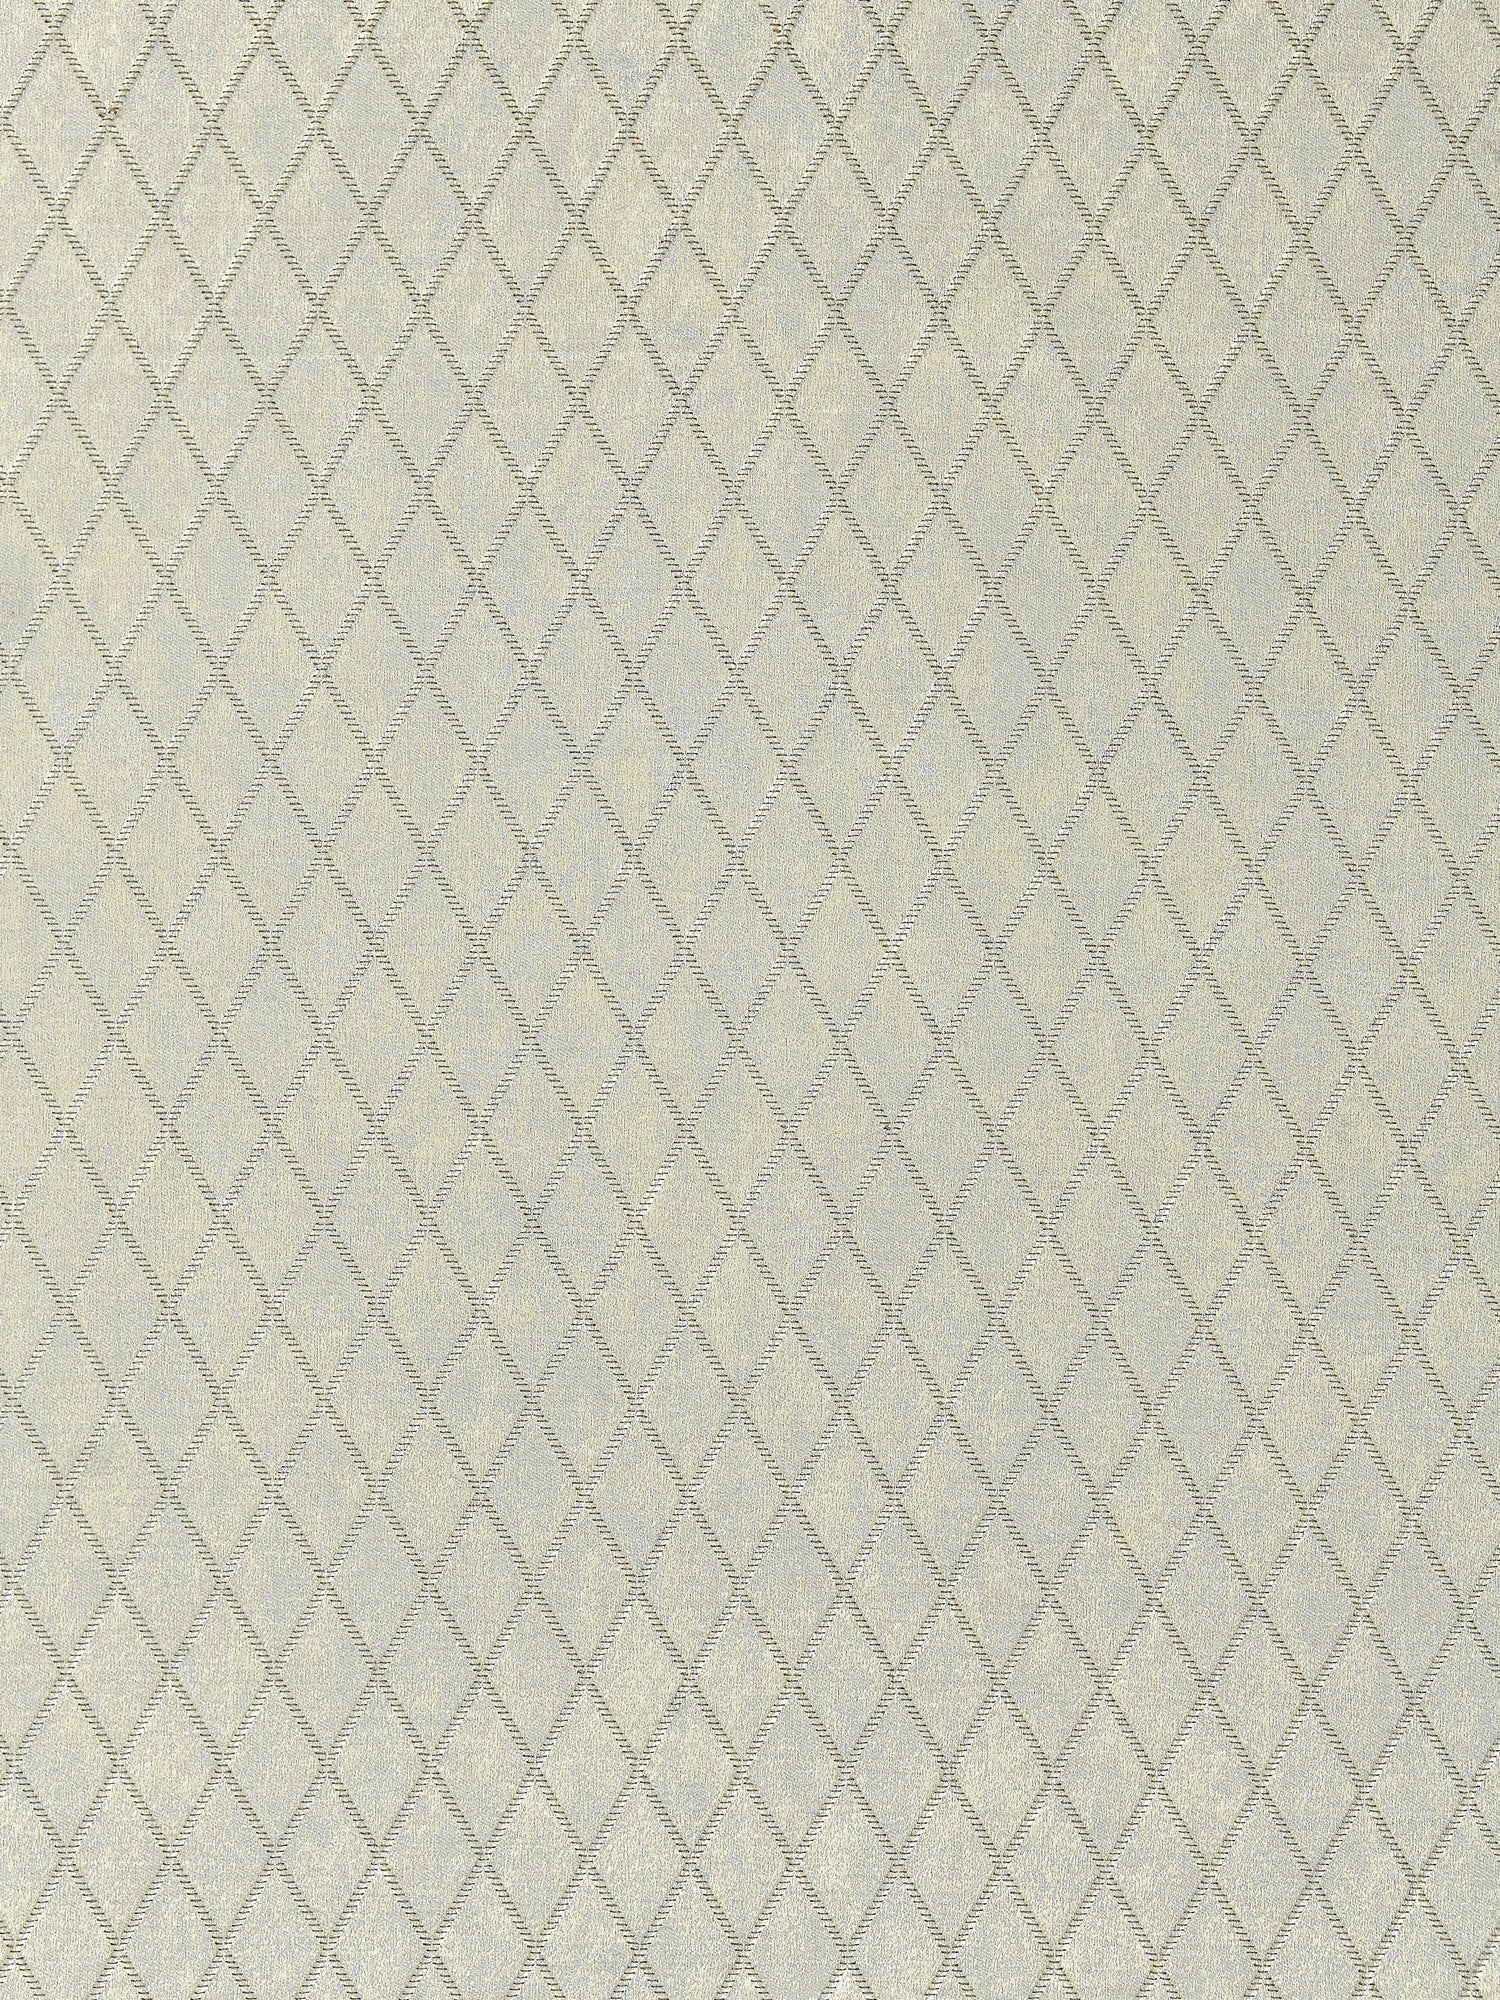 Diamond Weave fabric in pewter color - pattern number SC 000327143 - by Scalamandre in the Scalamandre Fabrics Book 1 collection